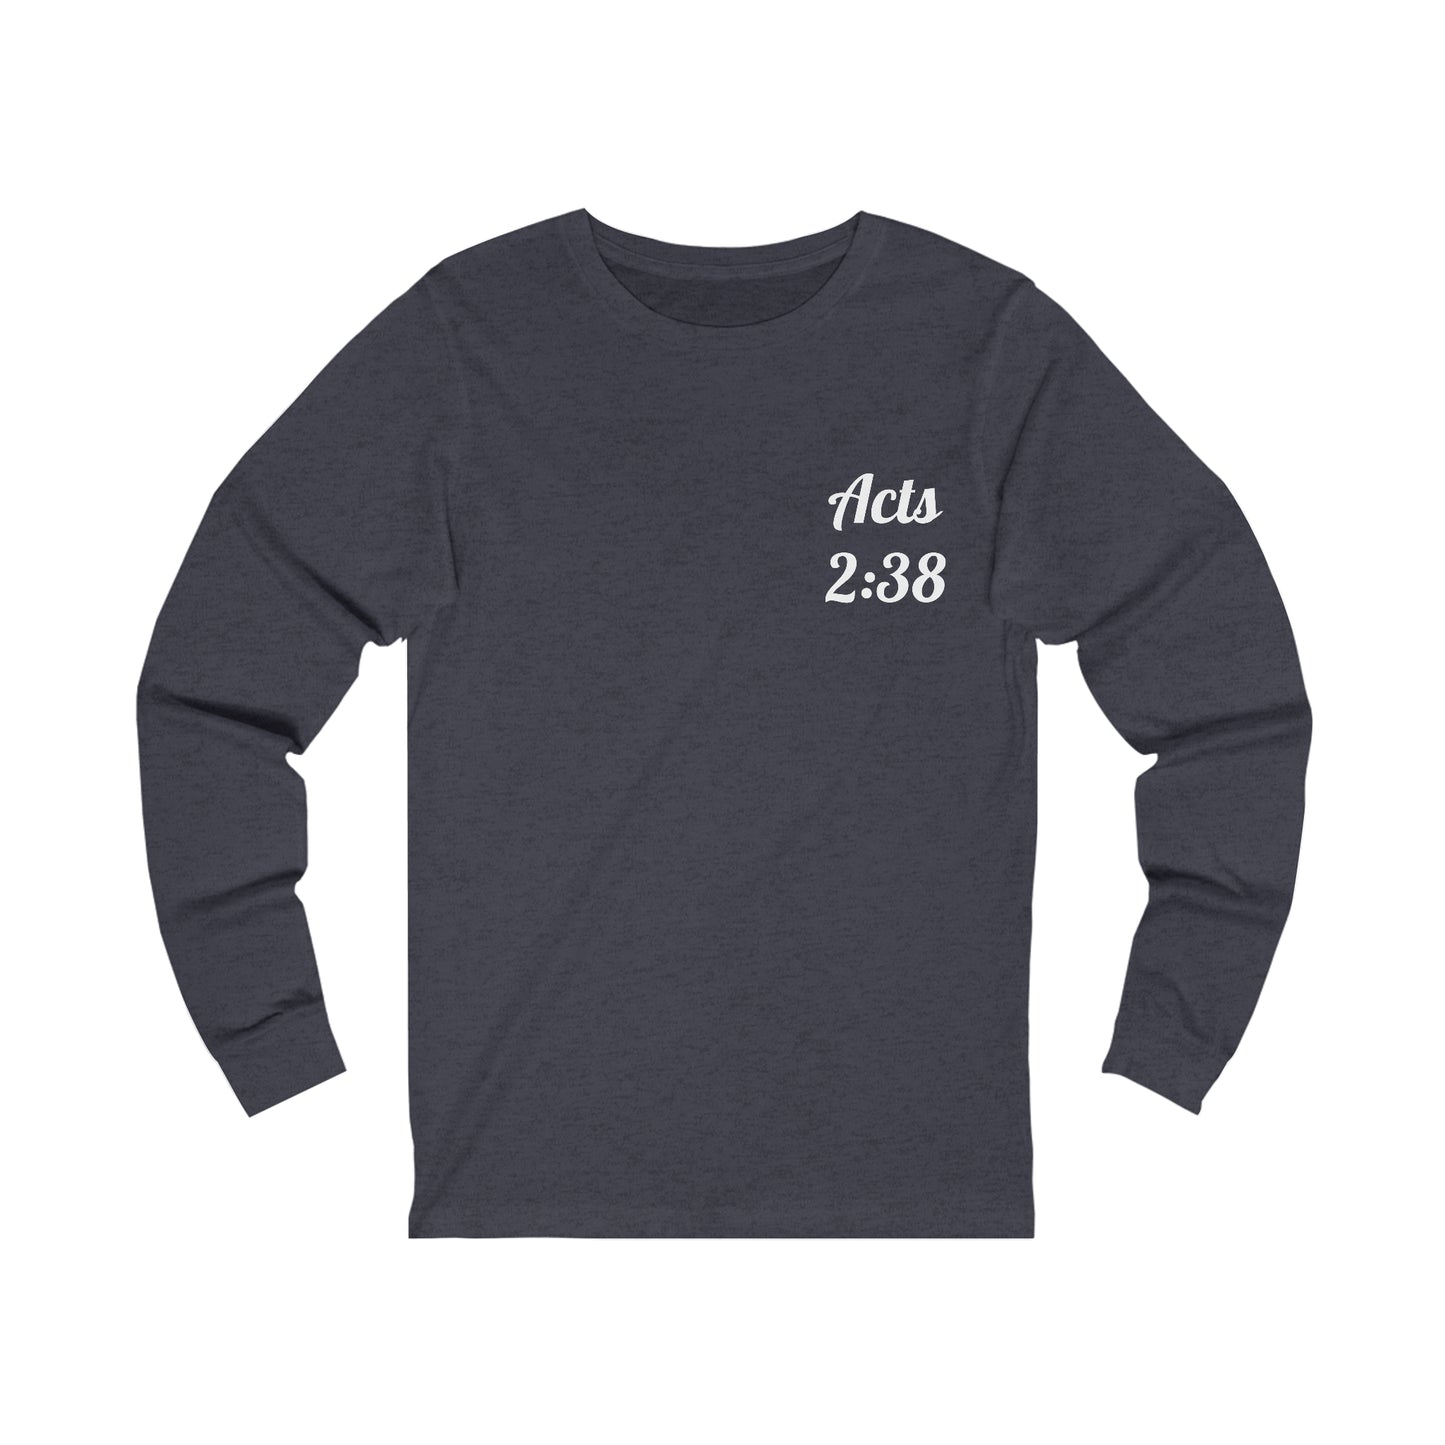 Acts2:38 (Dove on back) Unisex Jersey Long Sleeve Tee